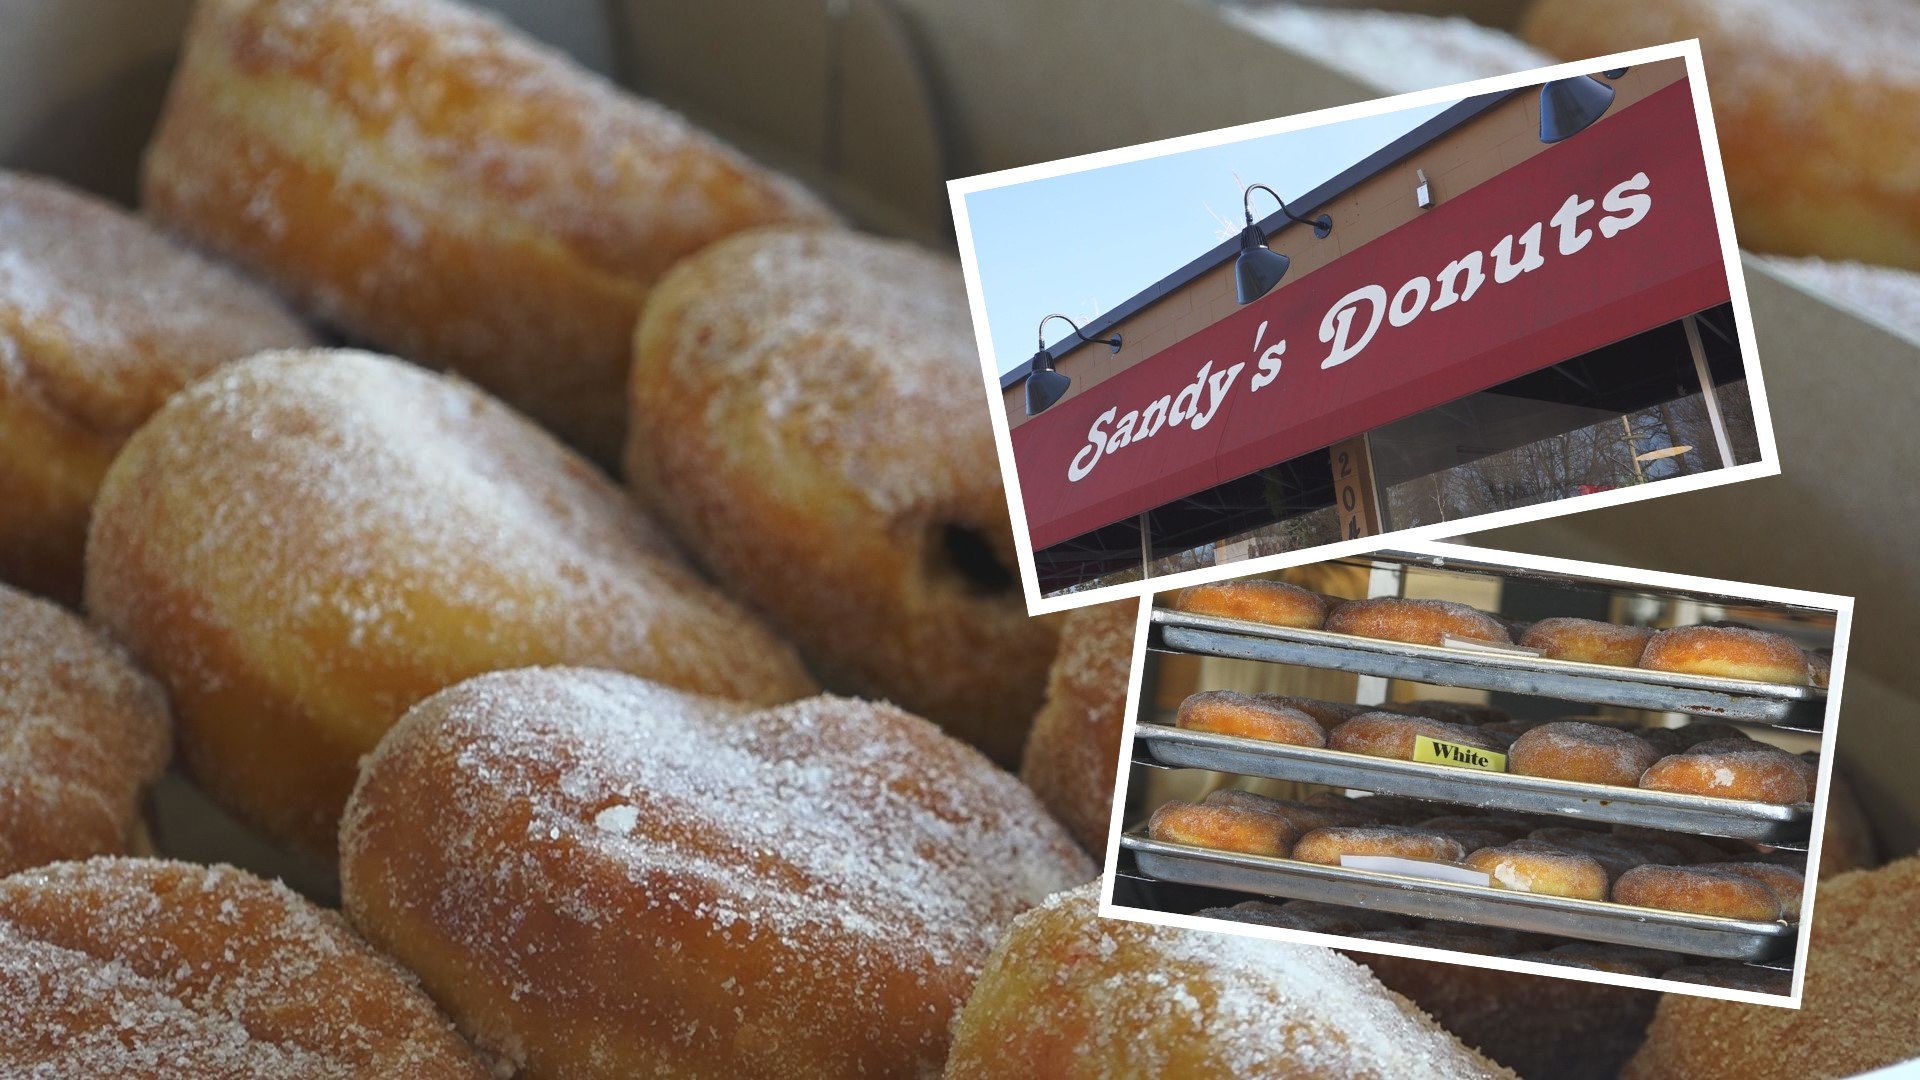 Fat Tuesday is almost here and West Michigan bakeries have spent months preparing. One Grand Rapids Westside staple, though, has been forced to make a change.